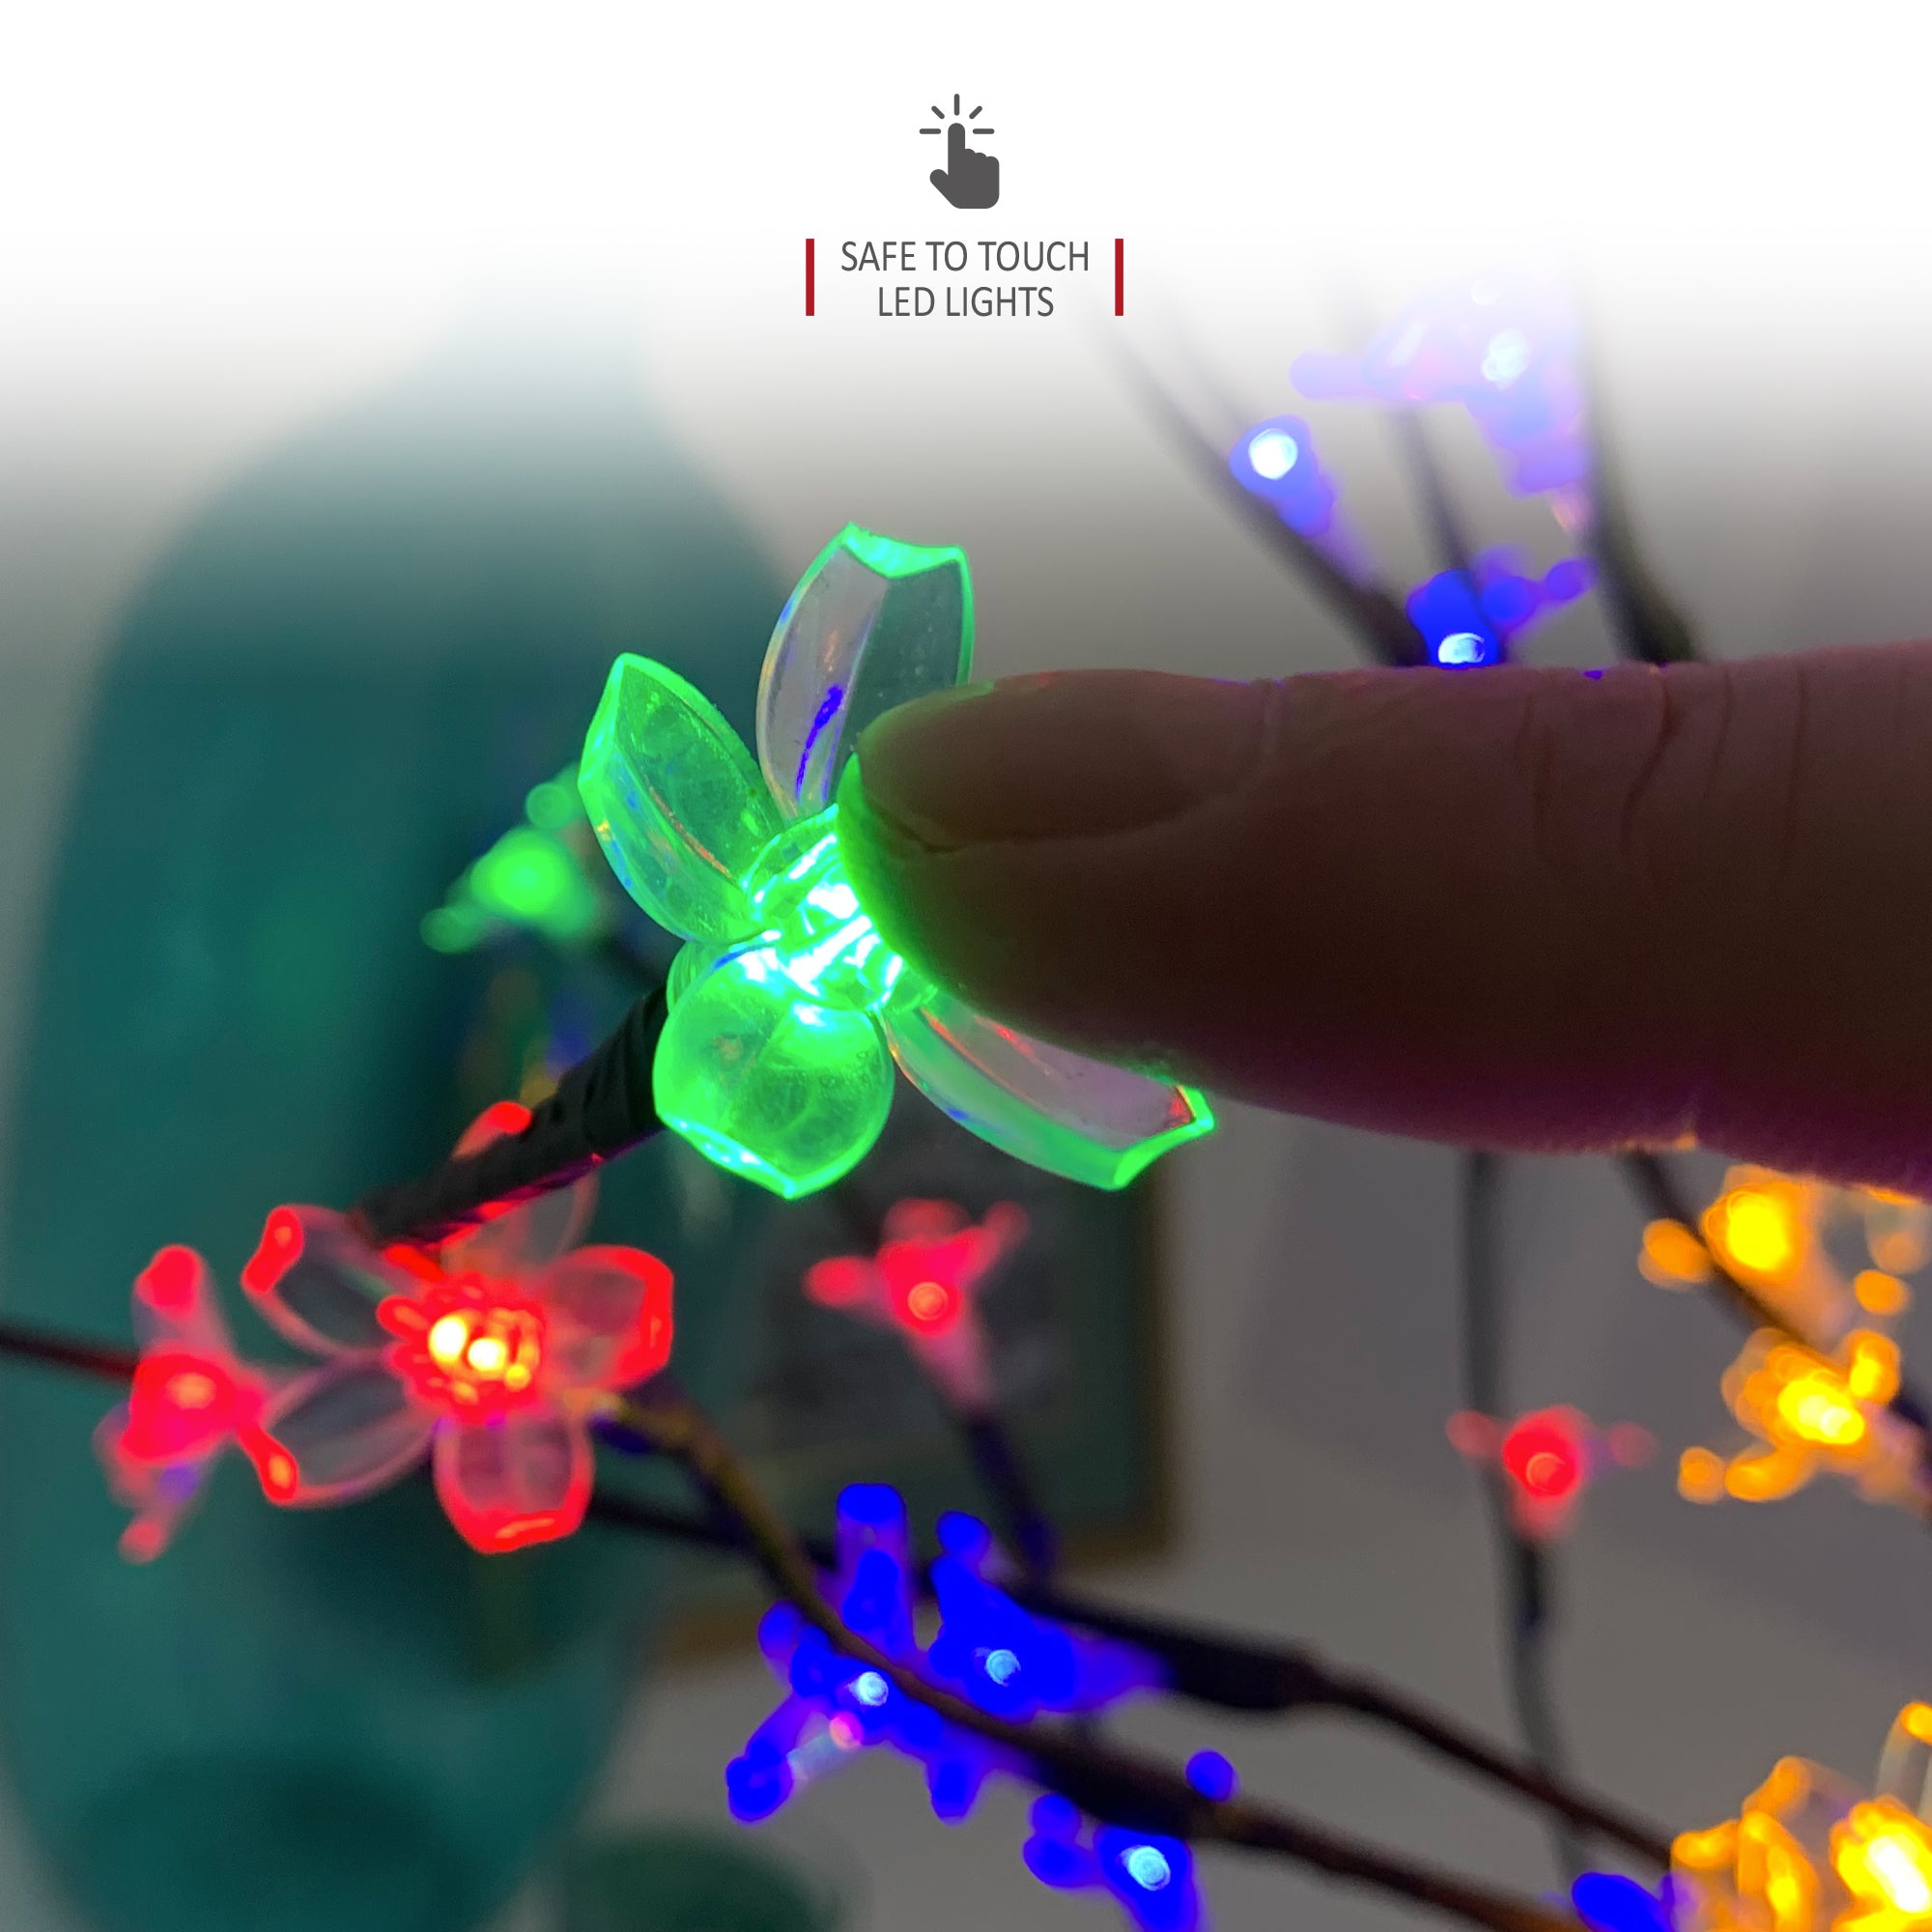 NETTA 7FT LED Cherry Blossom Tree, Pre-Lit 350 Lights, Auto-Off Timer and 8 Lighting Modes, 3M Power Cable, Suitable for Indoor and Outdoor Use - Multi-Colour